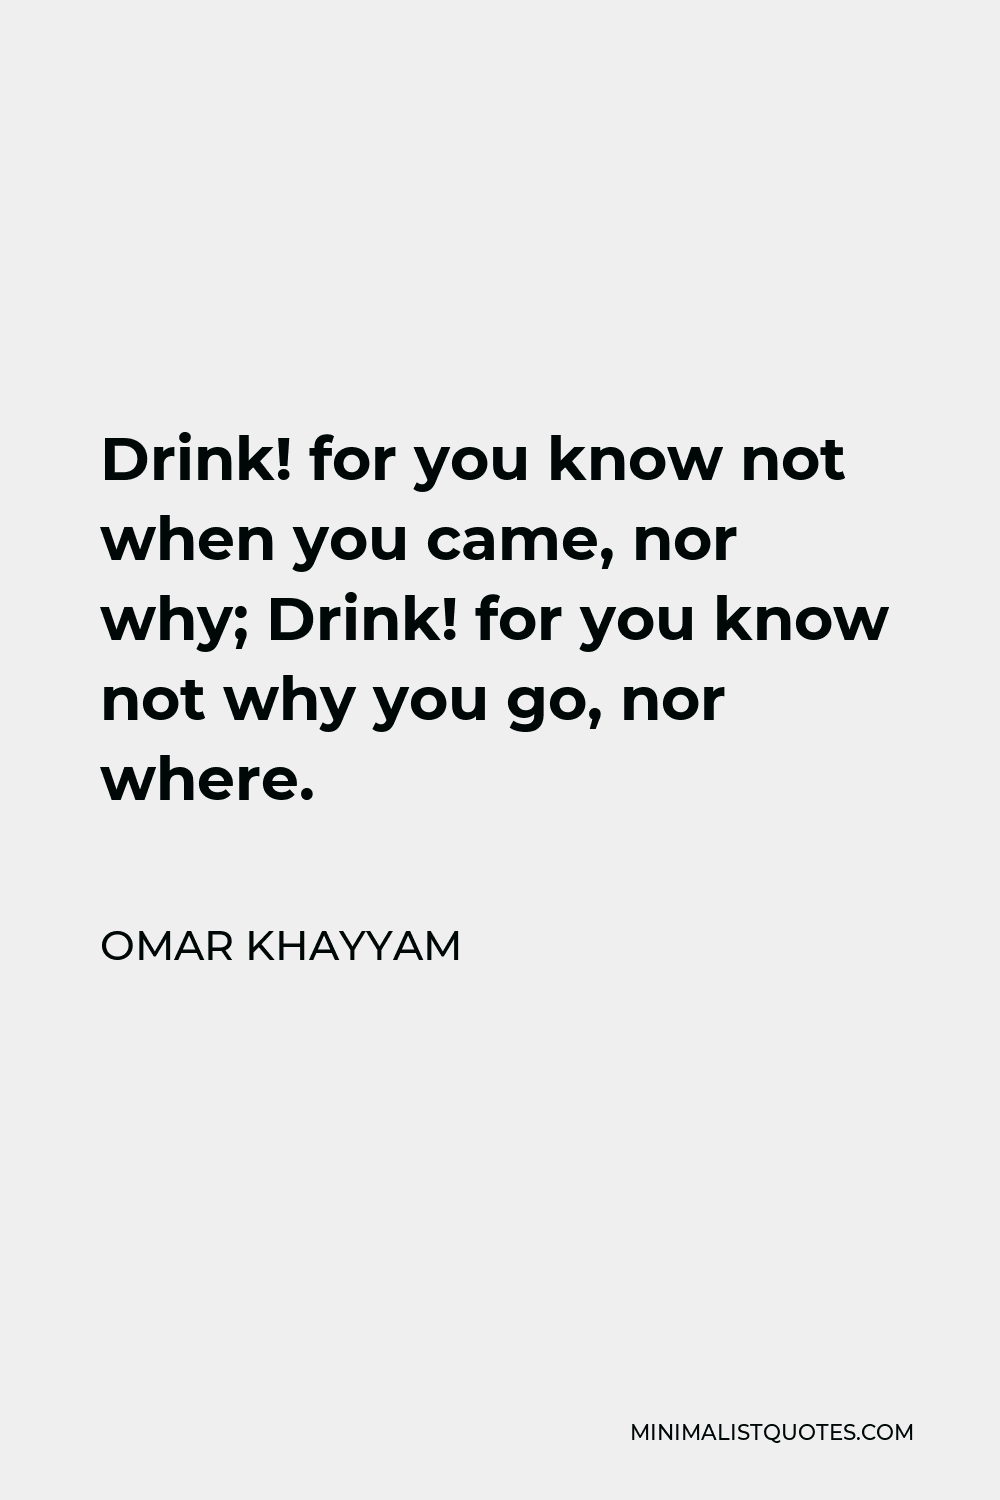 Omar Khayyam Quote - Drink! for you know not when you came, nor why; Drink! for you know not why you go, nor where.